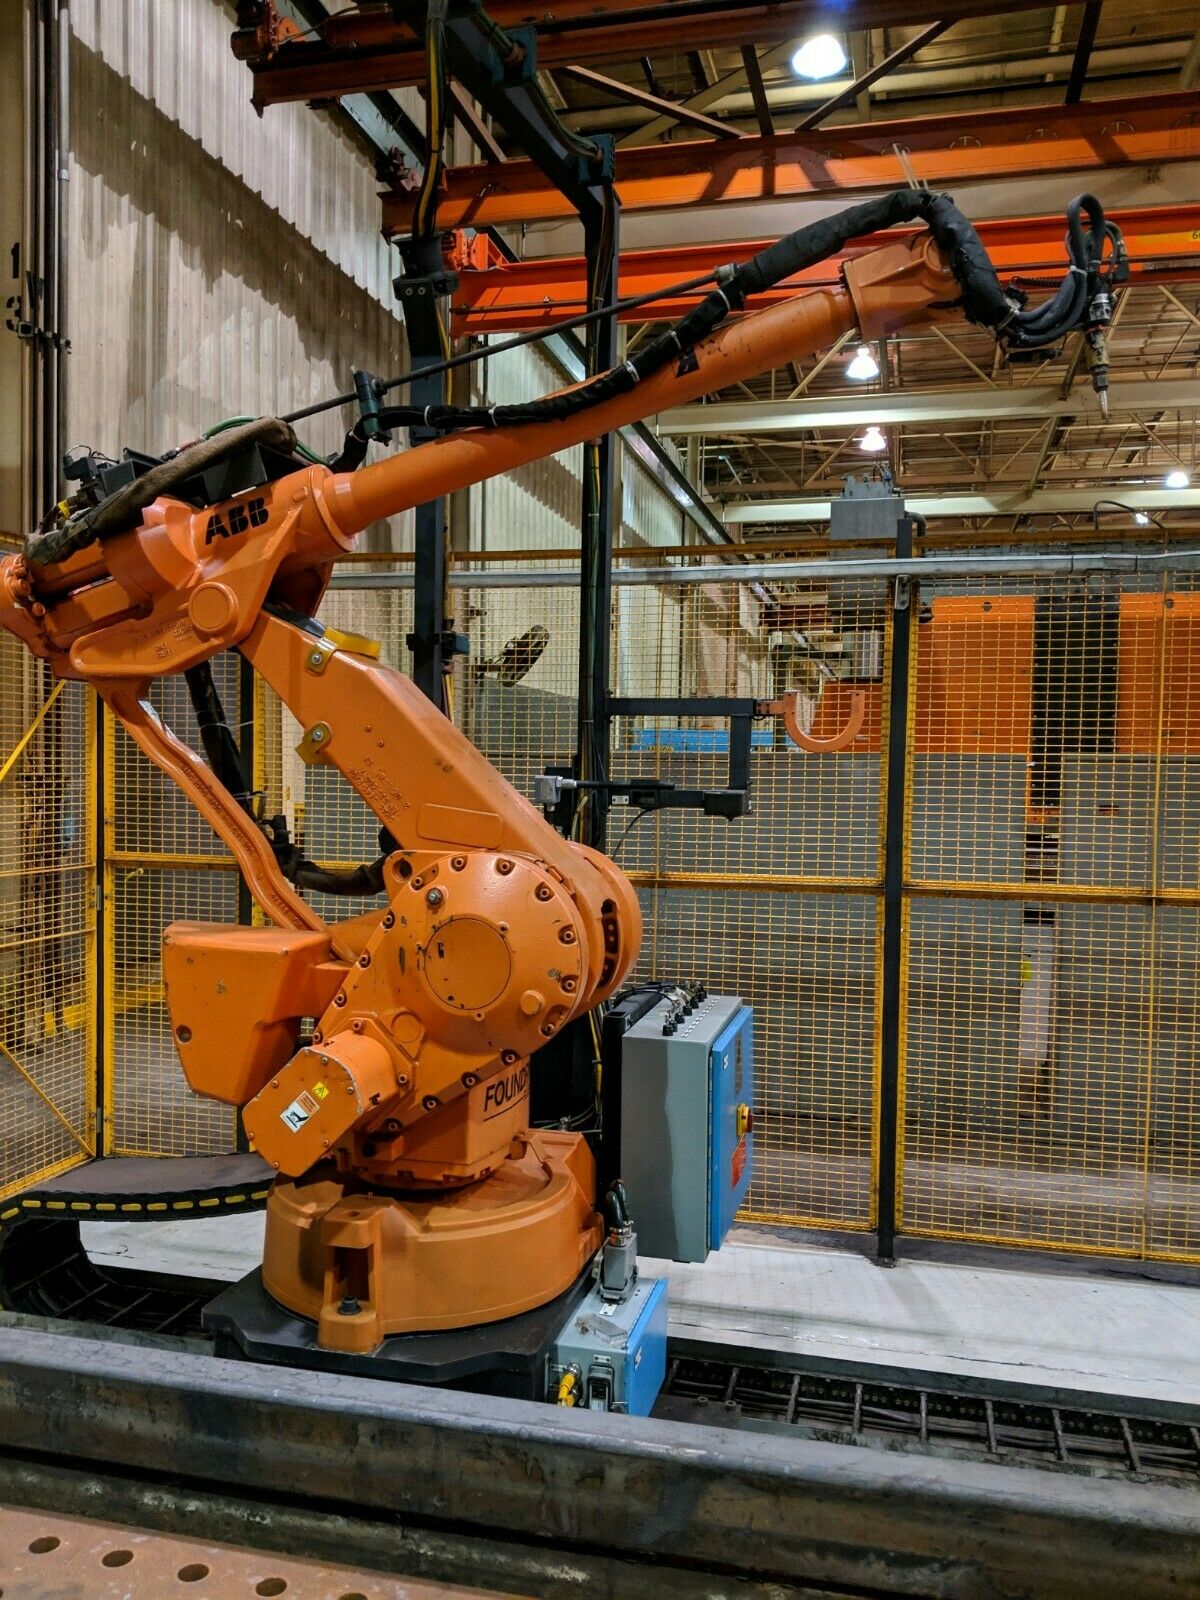 What Safety Standards Should be Followed for Robotic Automation?